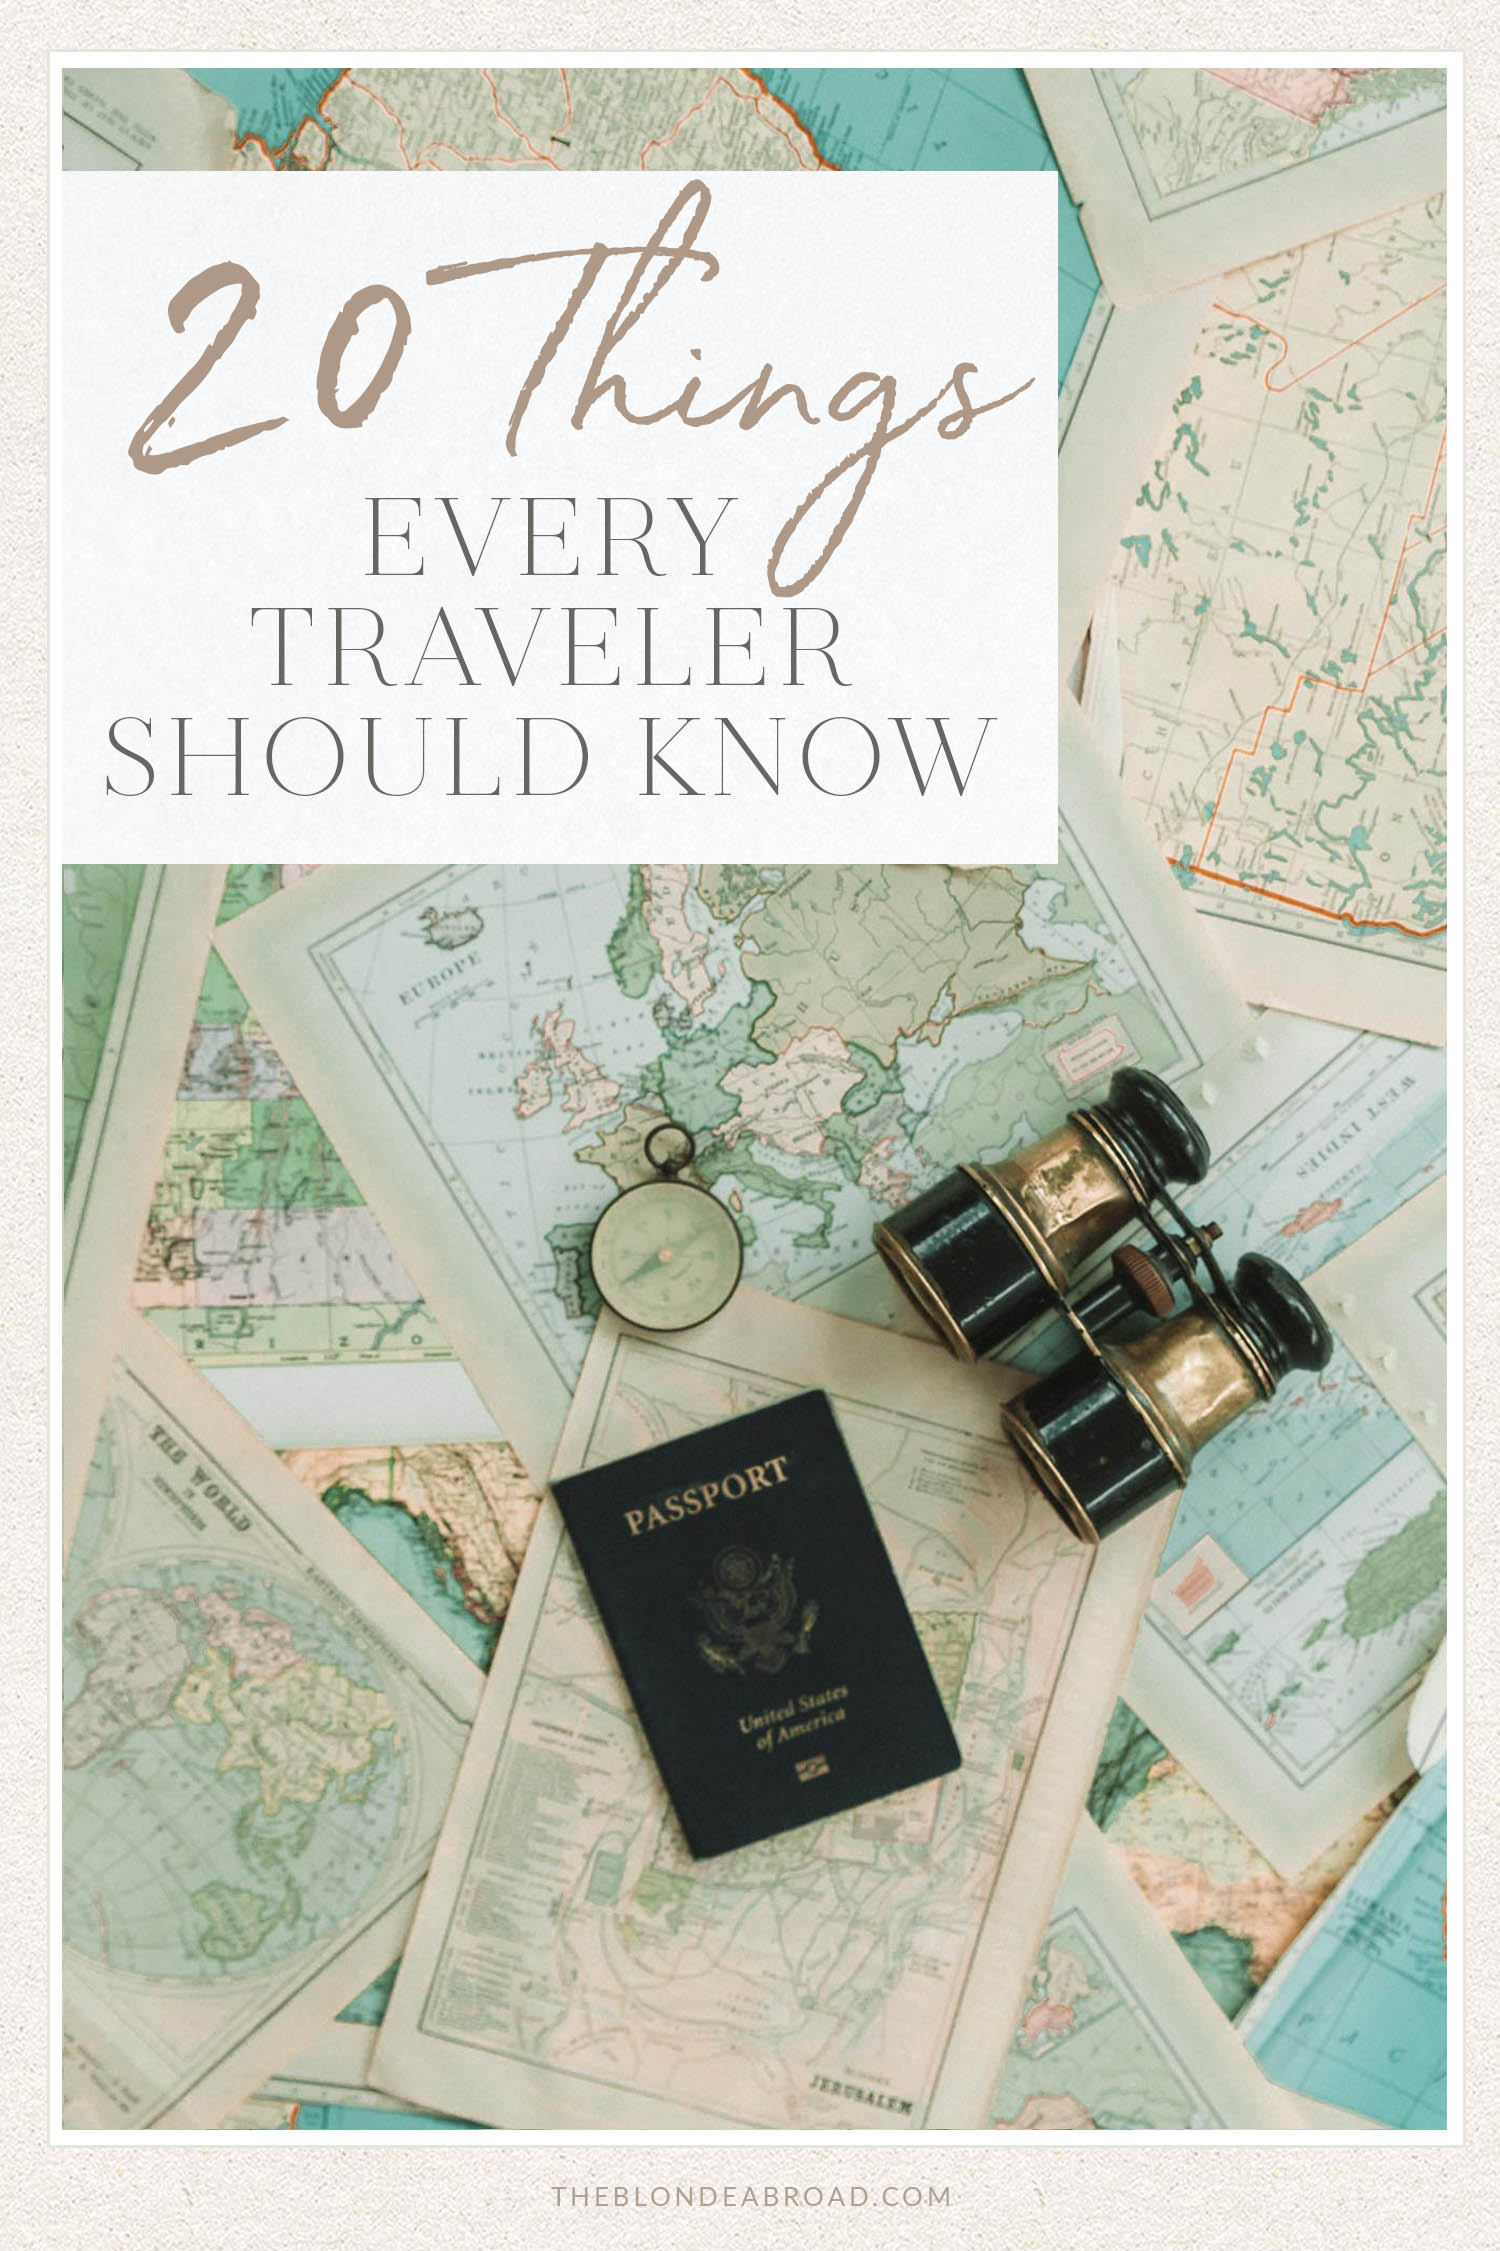 20 things every traveler should know